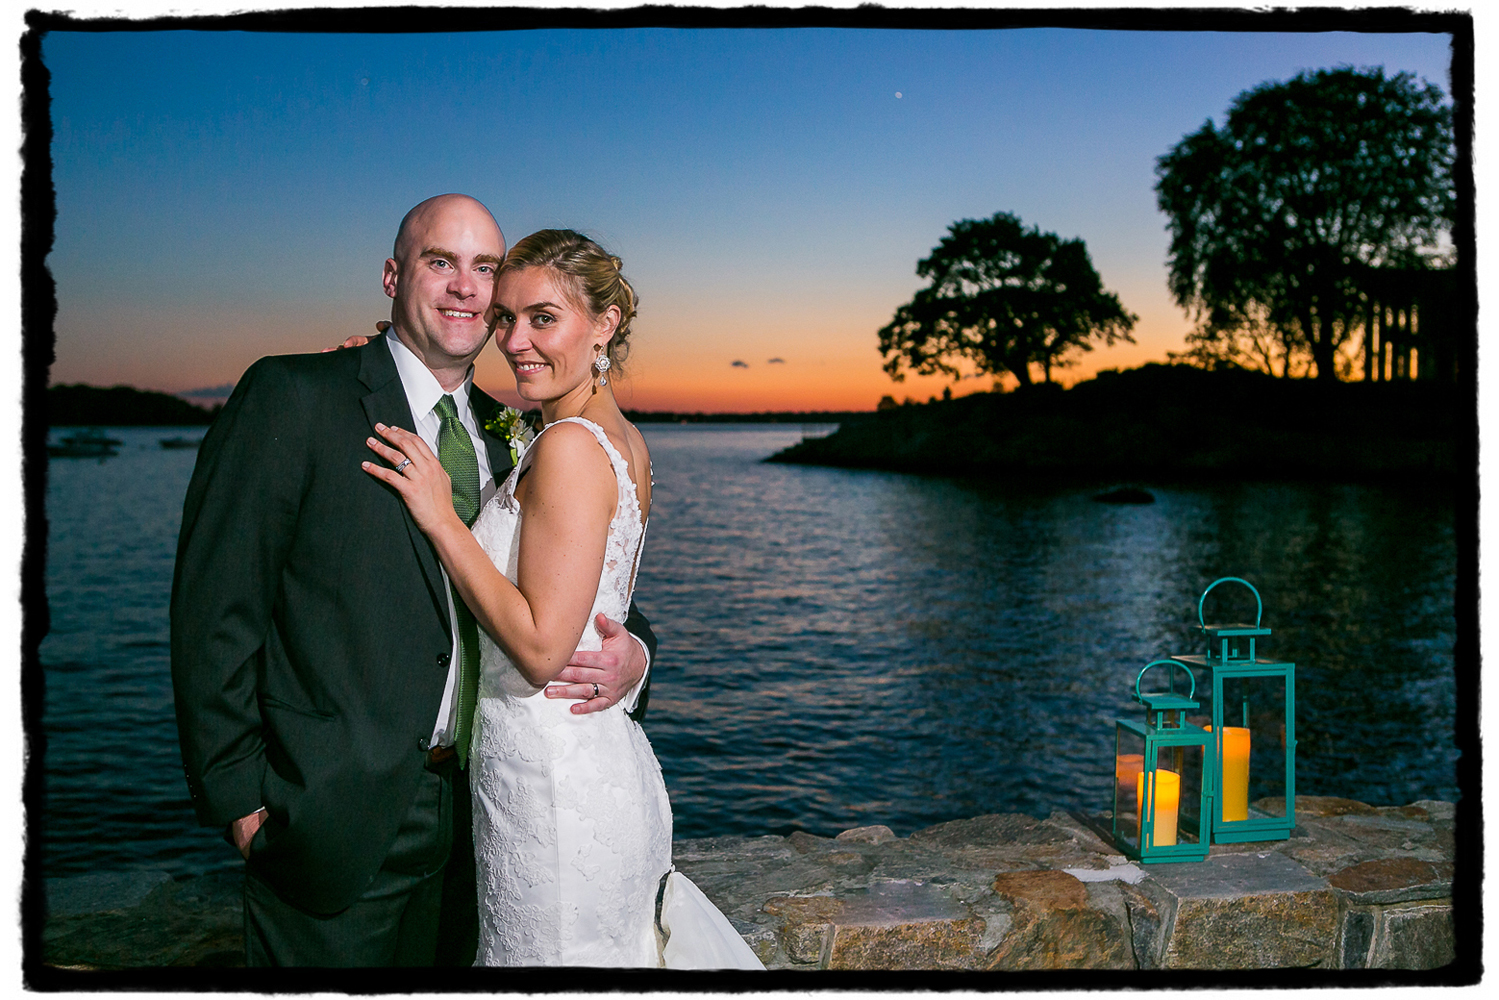 Carrie and Brian stepped outside the tent reception for a few minutes at sunset to get a portrait with the ocean view from Belle Haven Club in Greenwich, Connecticut.